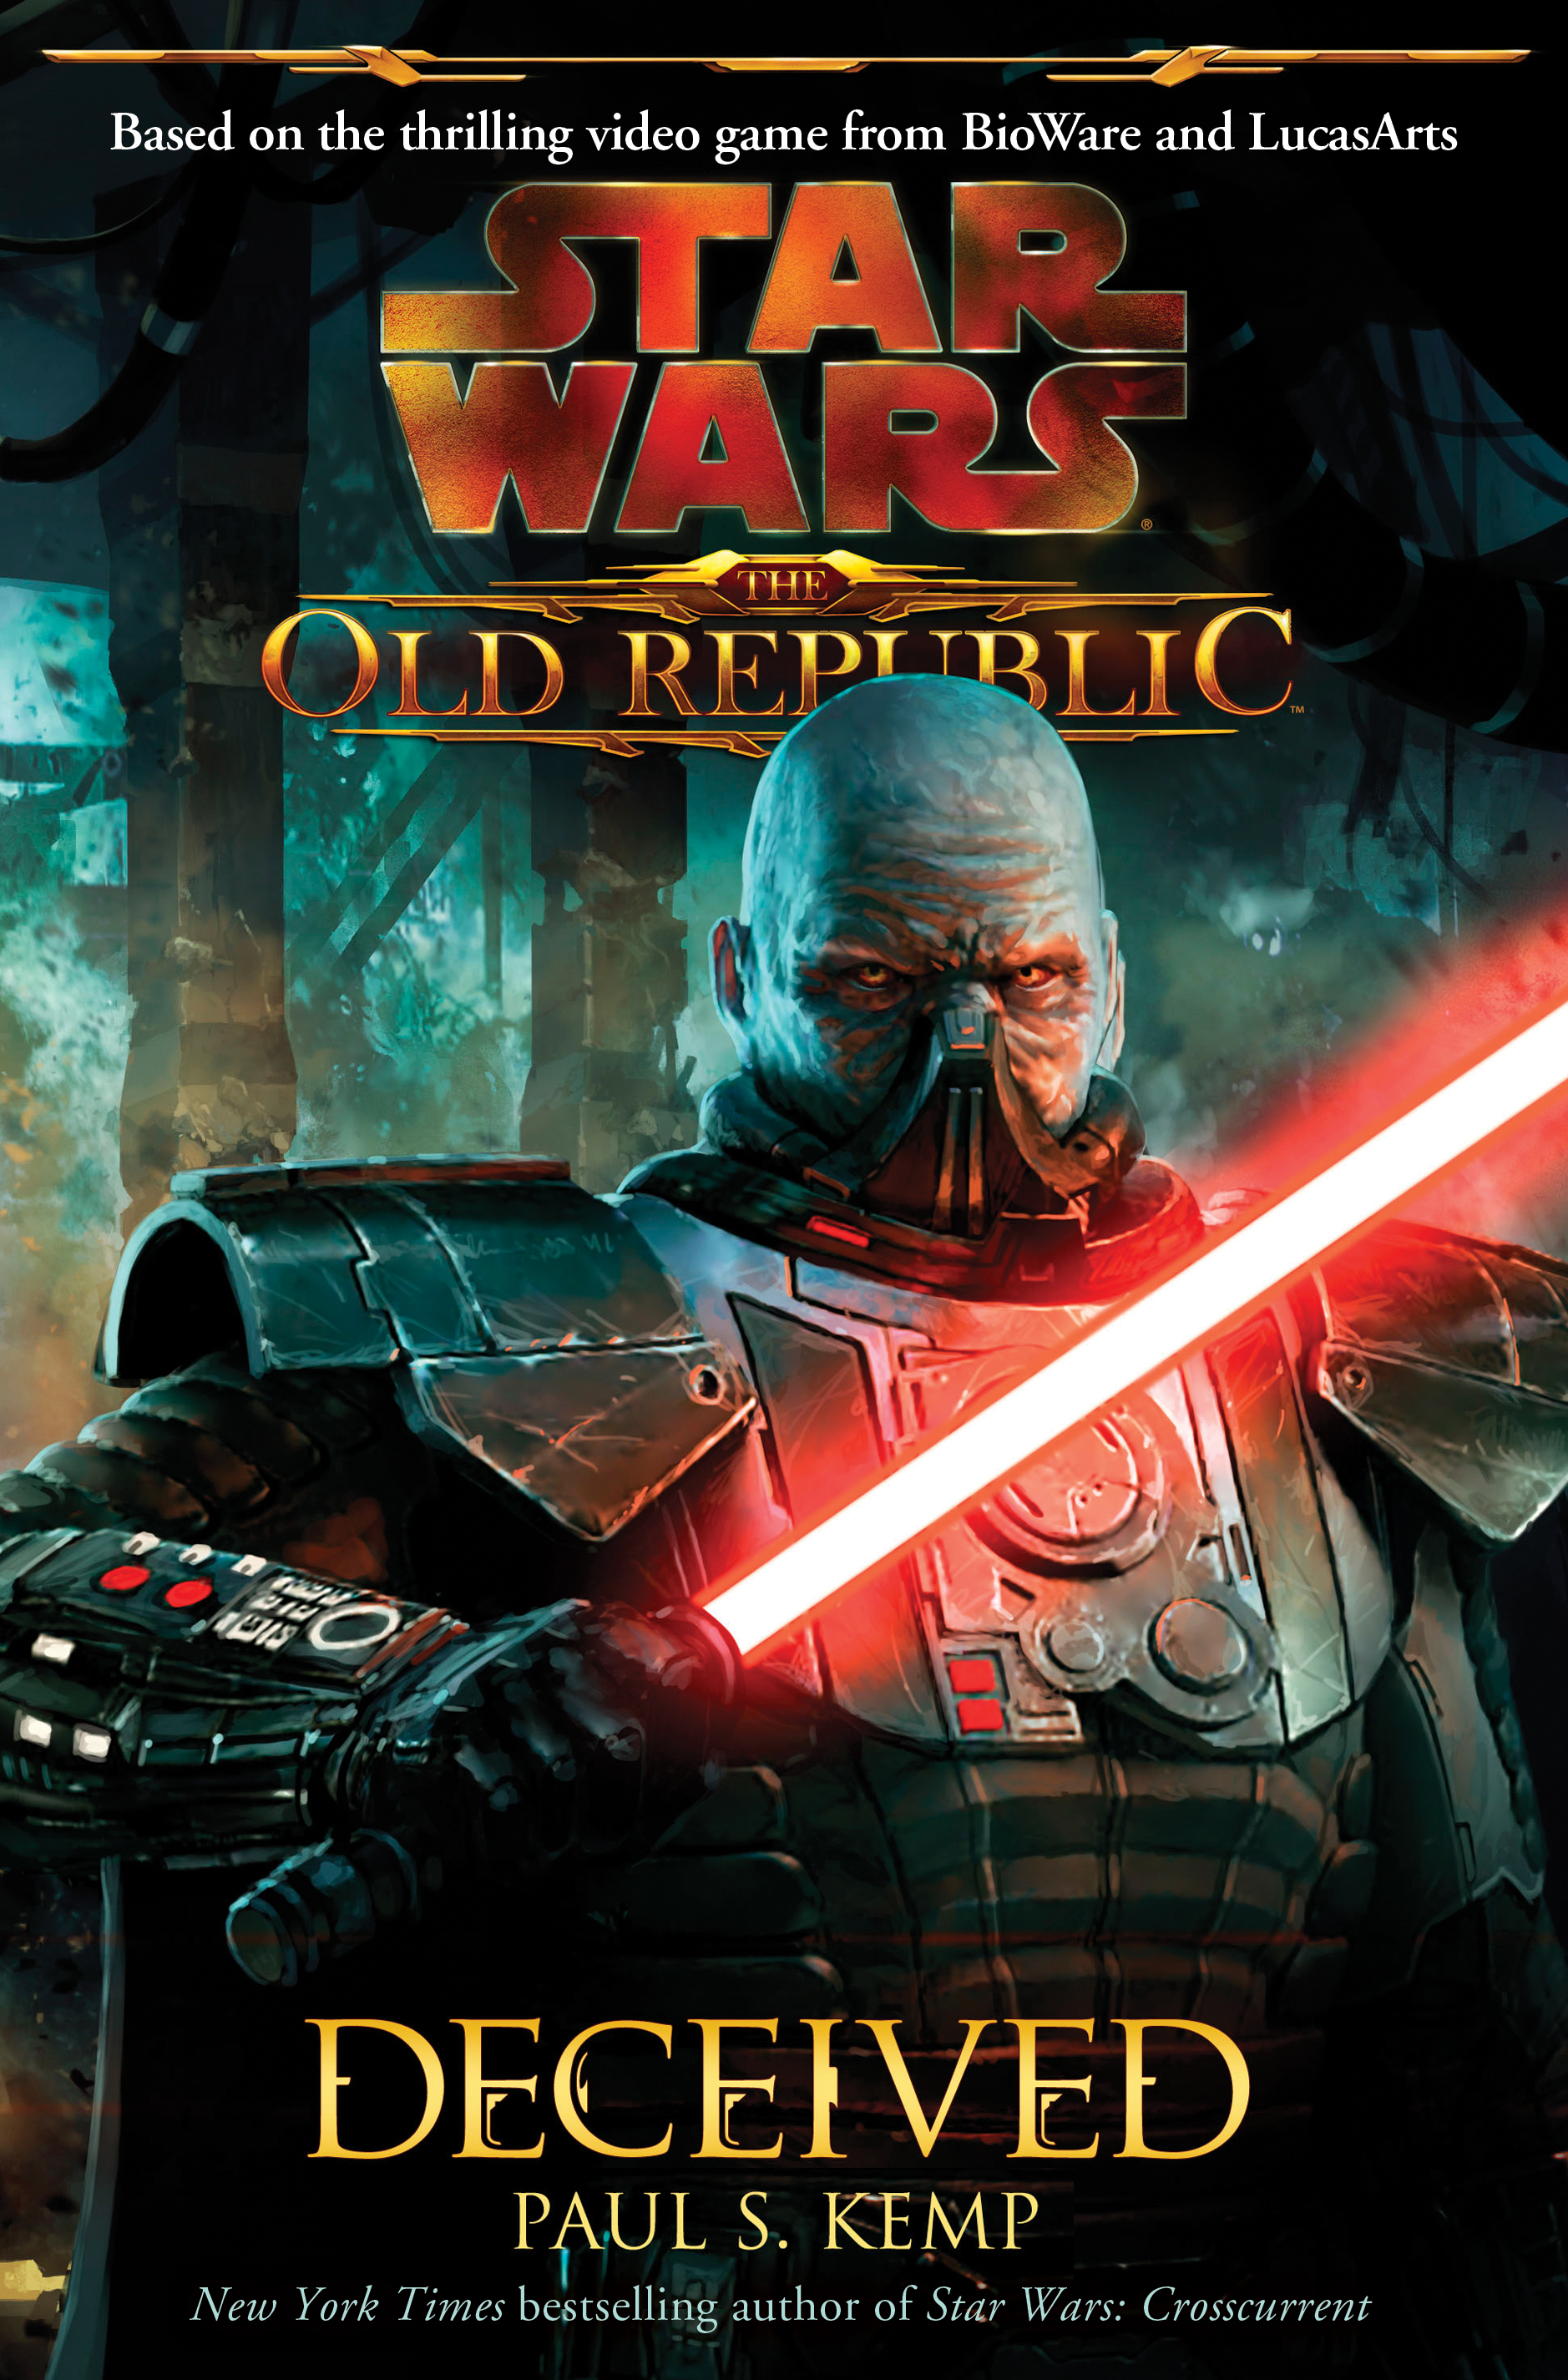 https://images1.wikia.nocookie.net/__cb20100430082630/starwars/images/c/cd/Swtor_deceived_cover.jpg